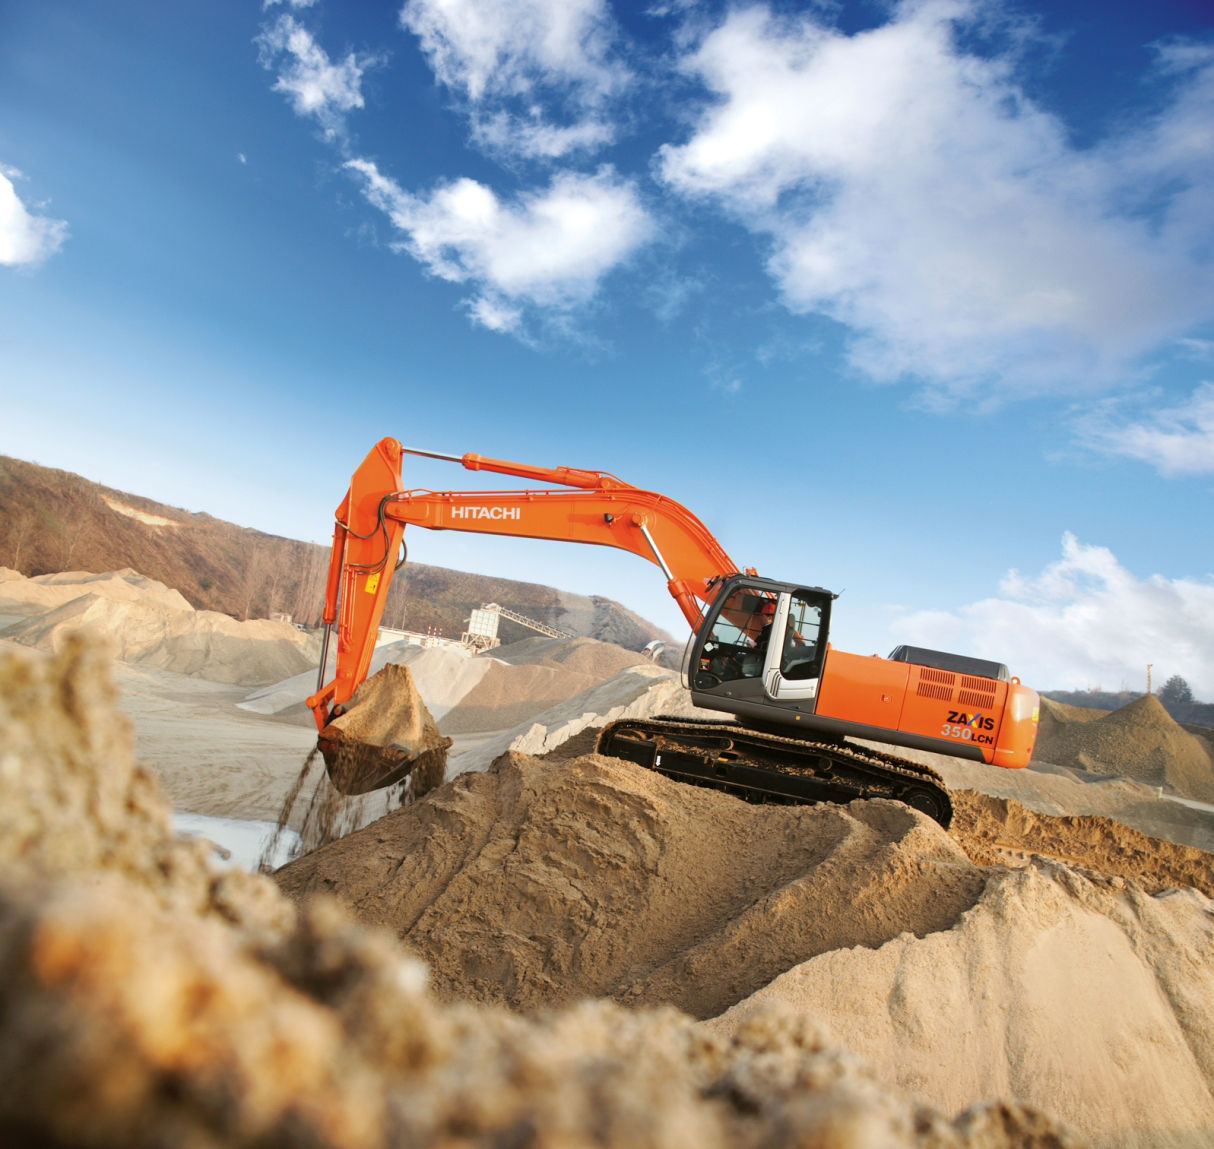 Launched hydraulic excavators of ZAXIS-3 series (received 2006 Good Design Award and 2007 iF Design Award).